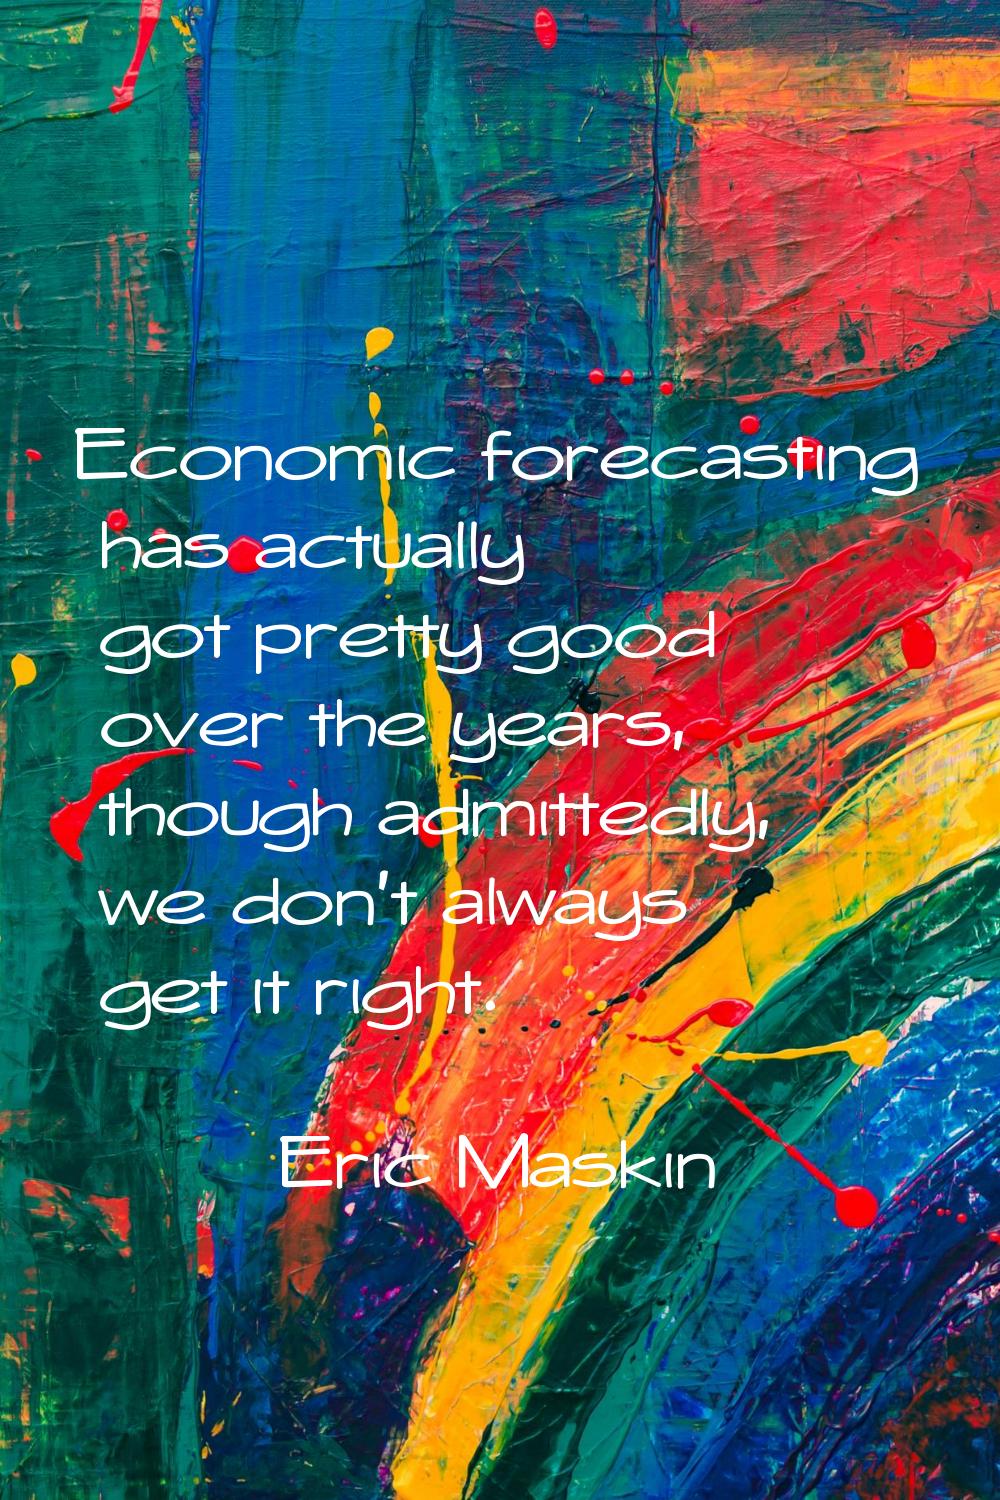 Economic forecasting has actually got pretty good over the years, though admittedly, we don't alway